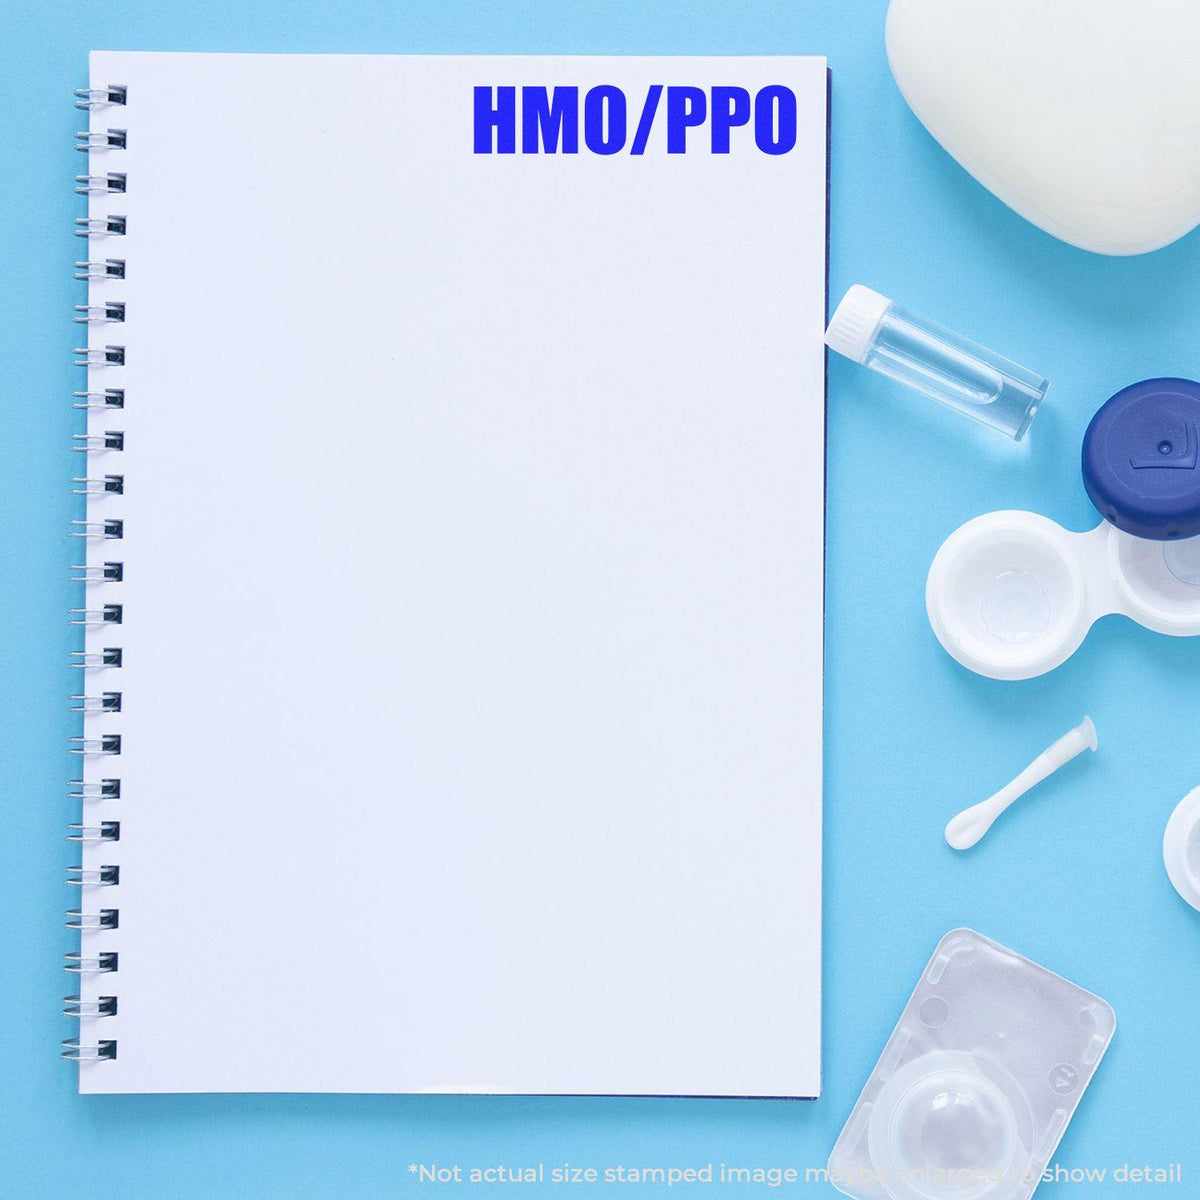 In Use Large Hmo Ppo Rubber Stamp Image